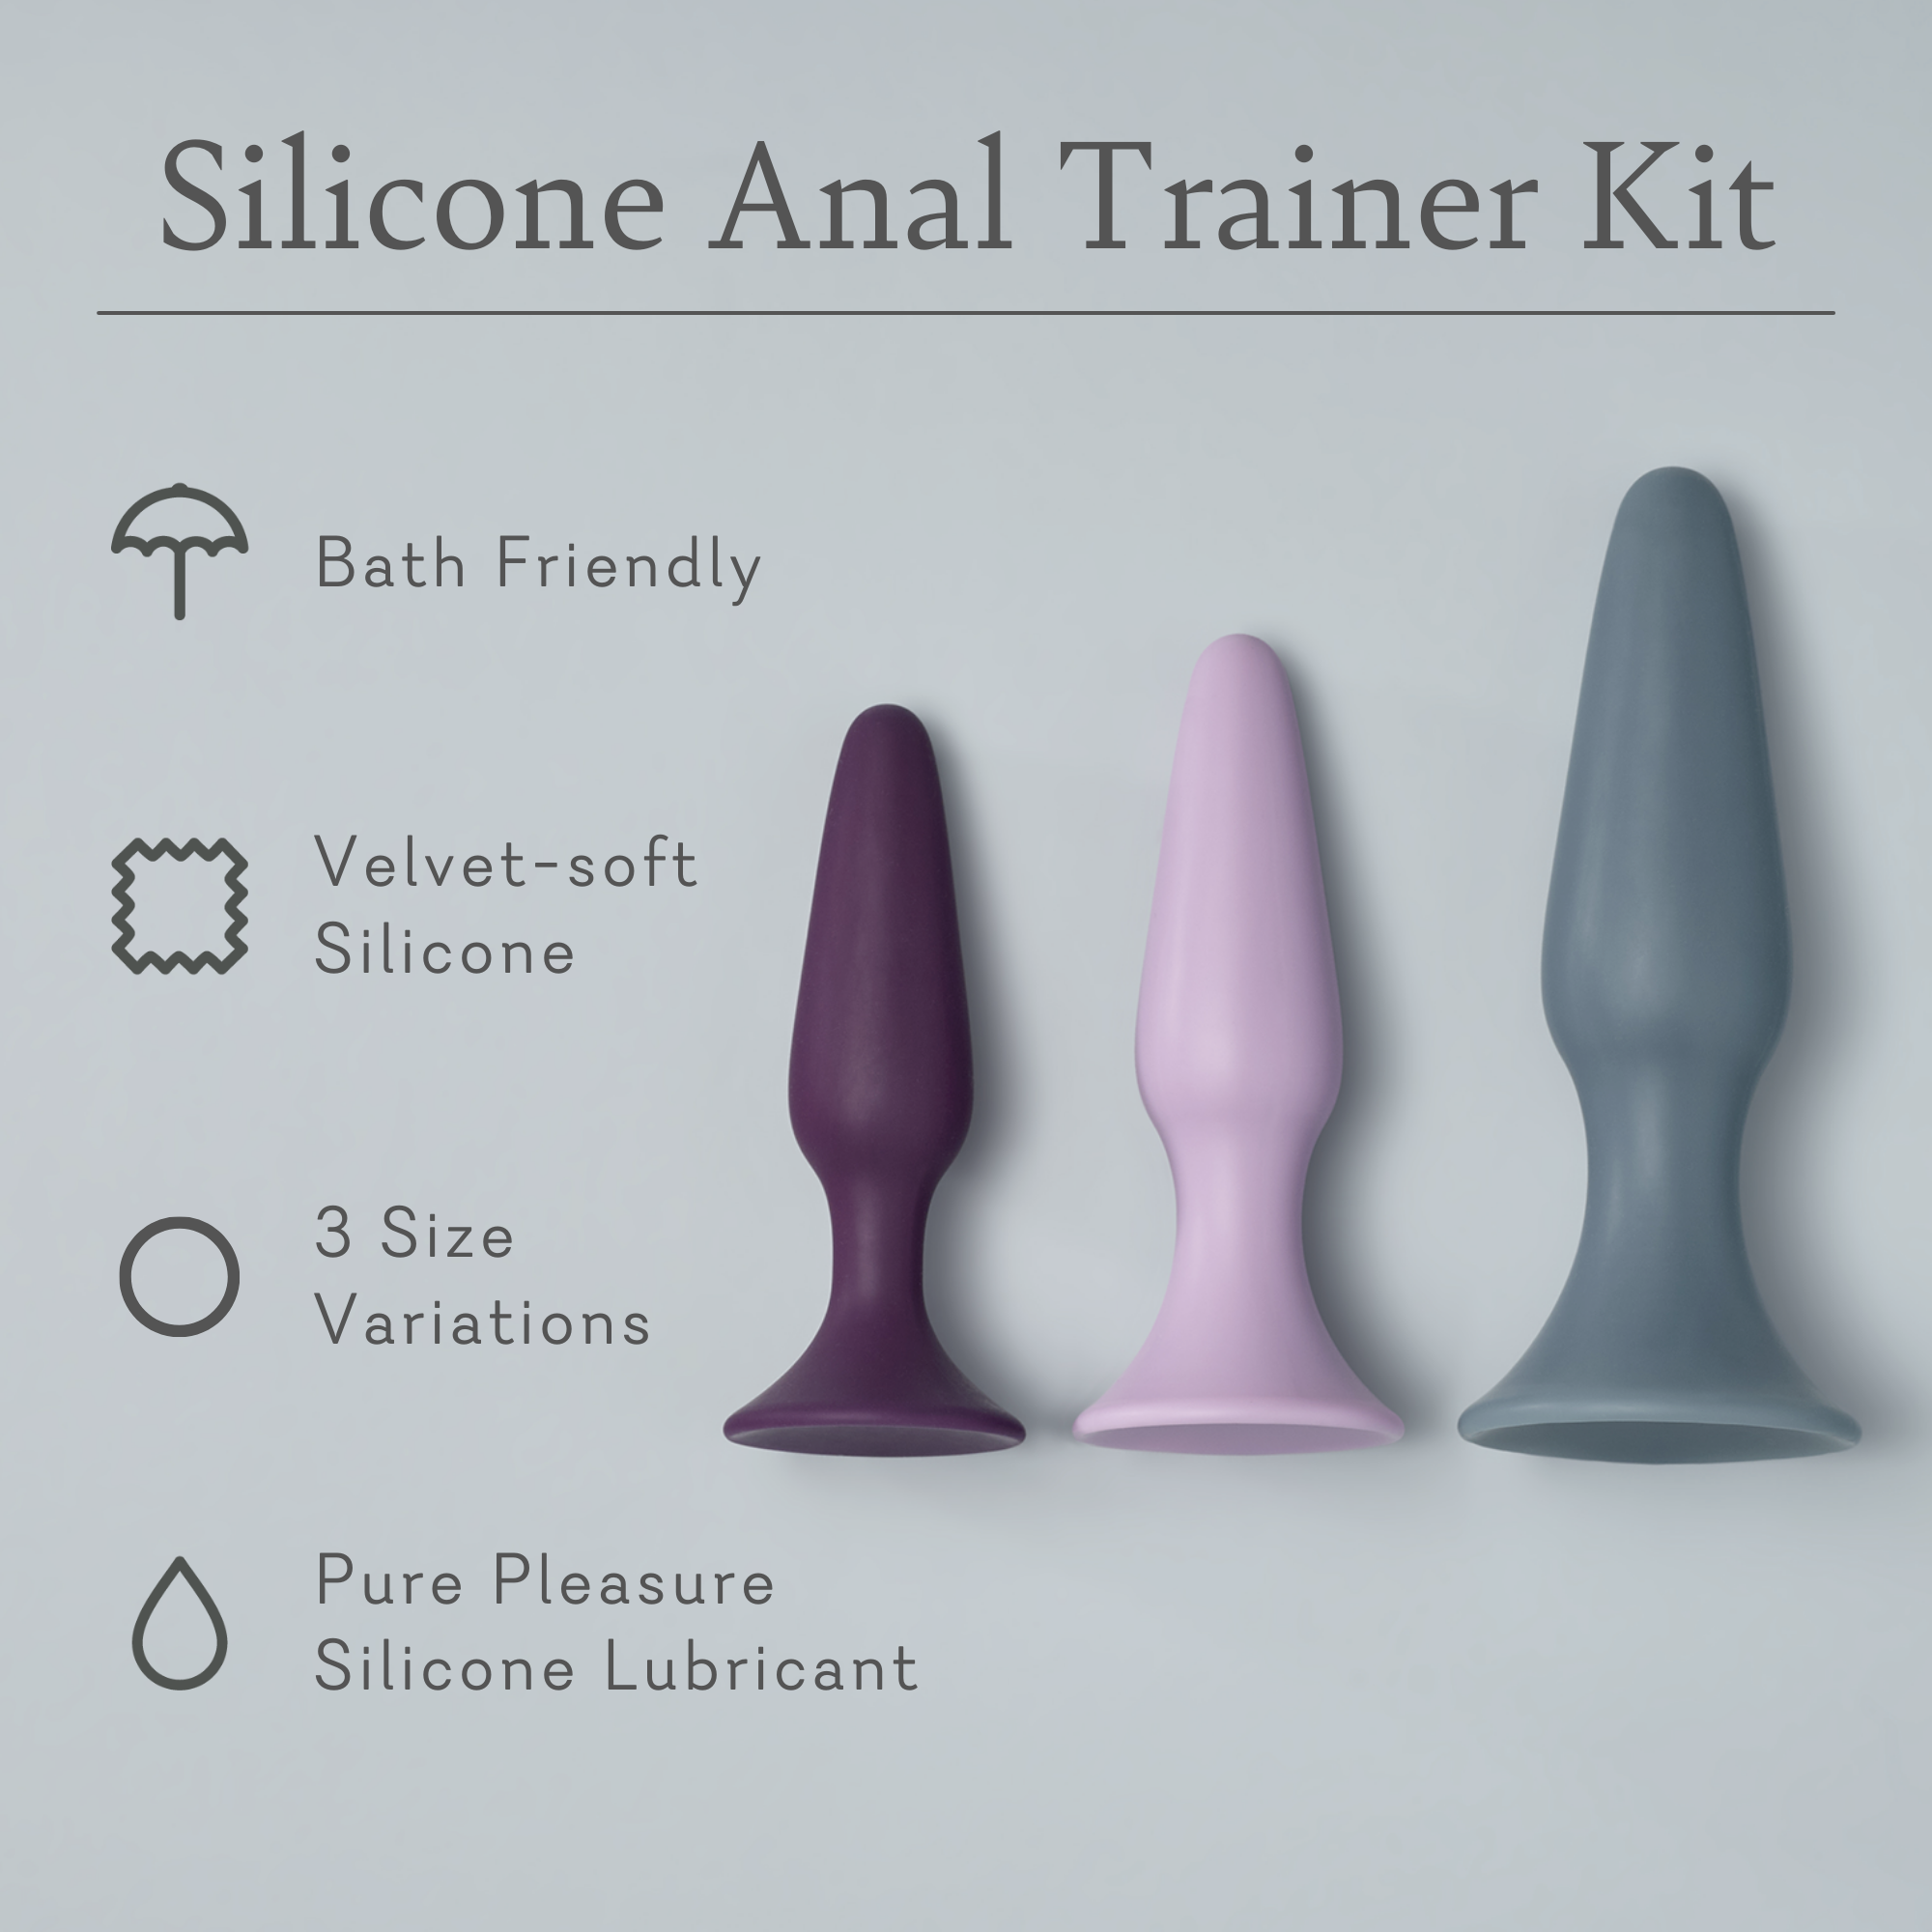 Anal Trainer